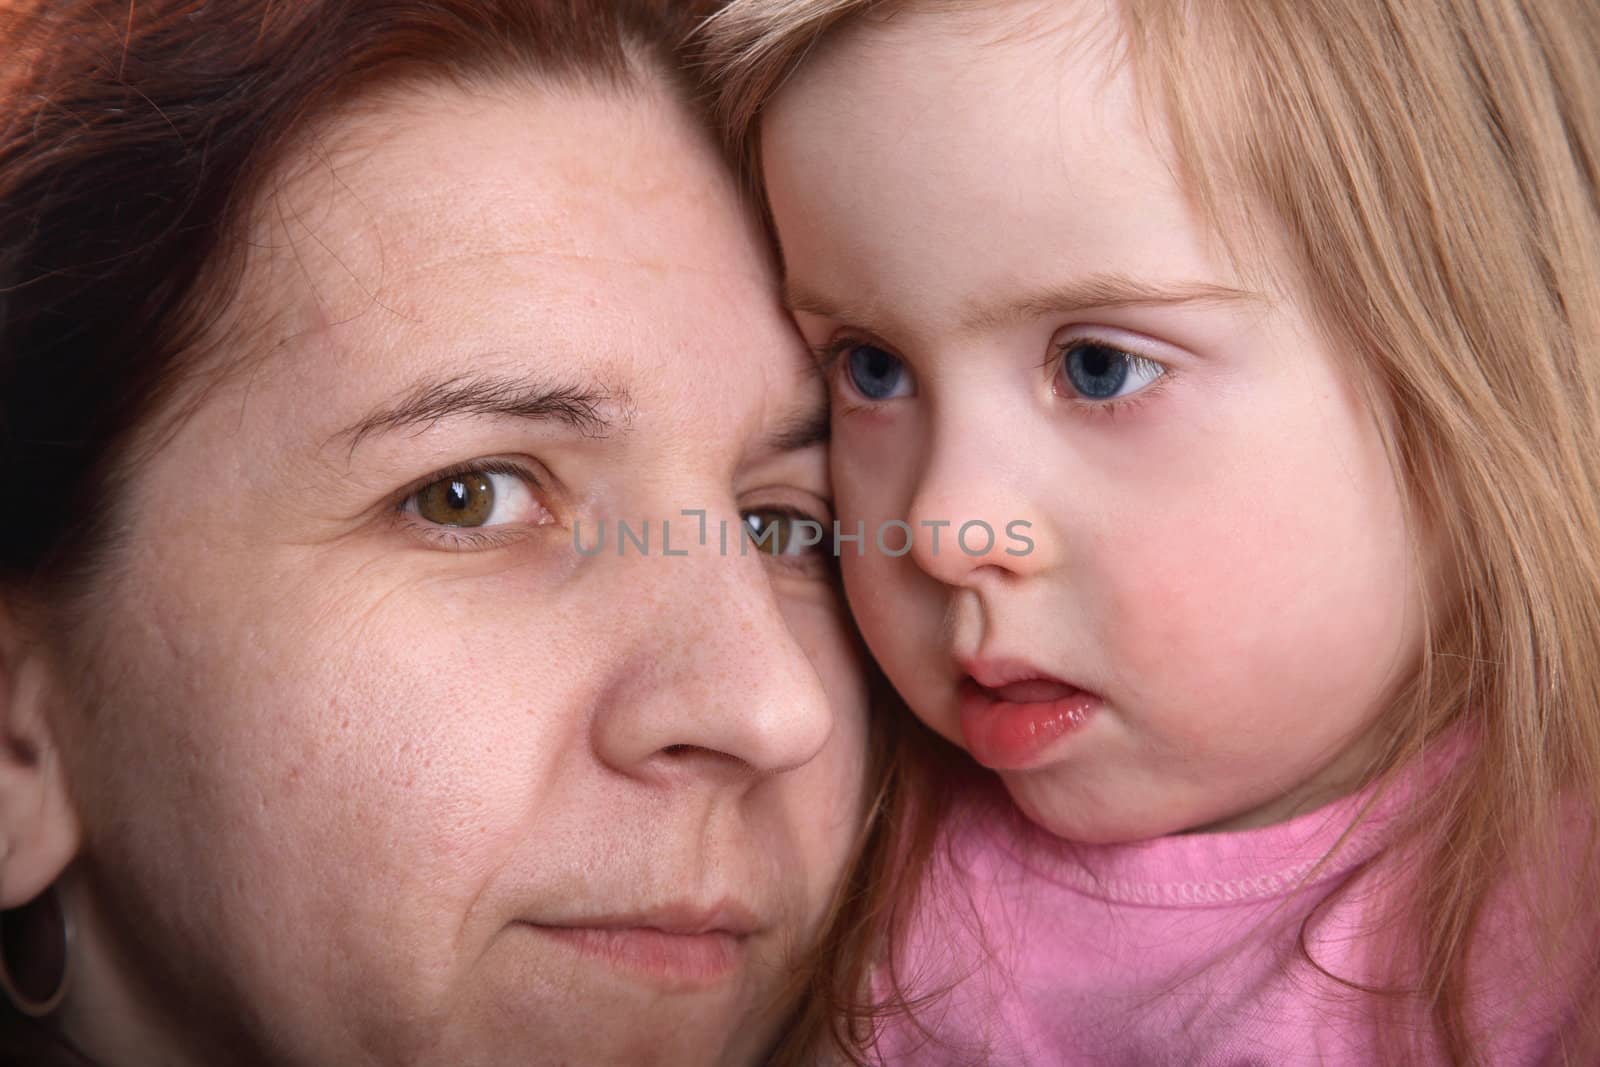 A closeup portrait of a young girl with Down Syndrome and her mother.